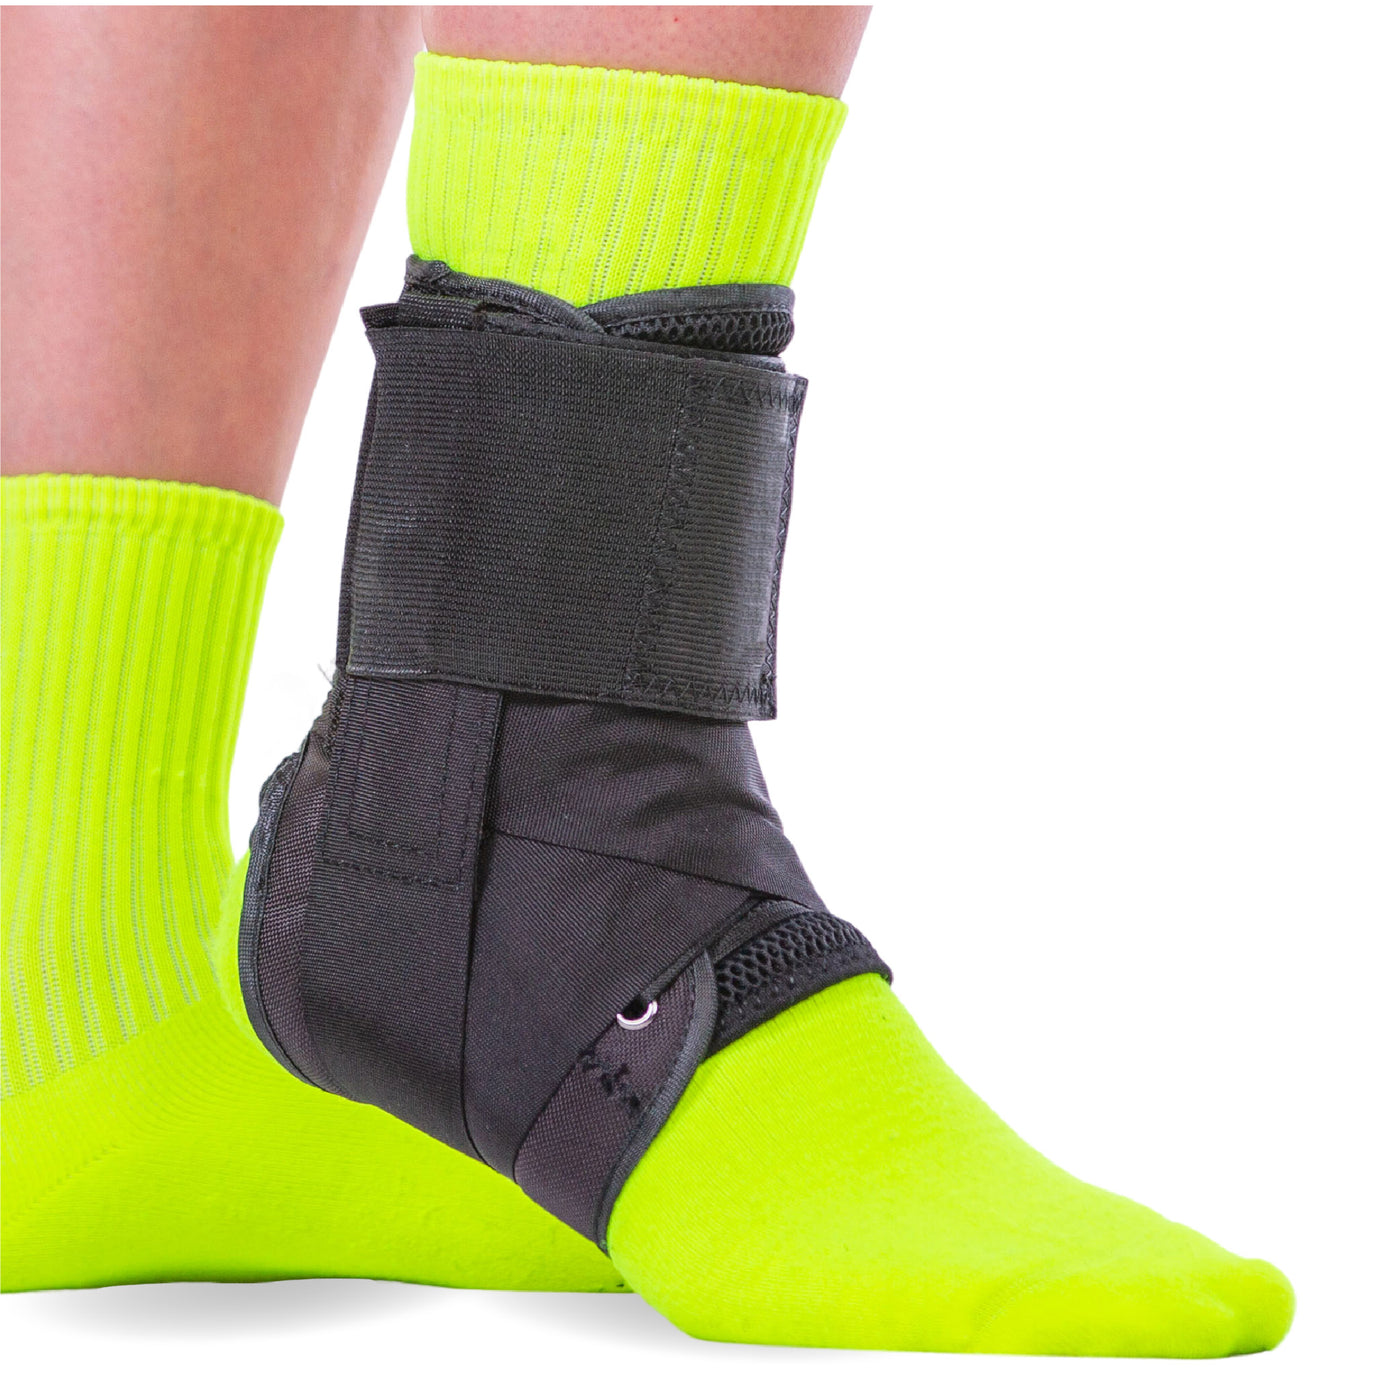 lace-up ankle brace for arthritis, lateral pain, high sprains, and instability